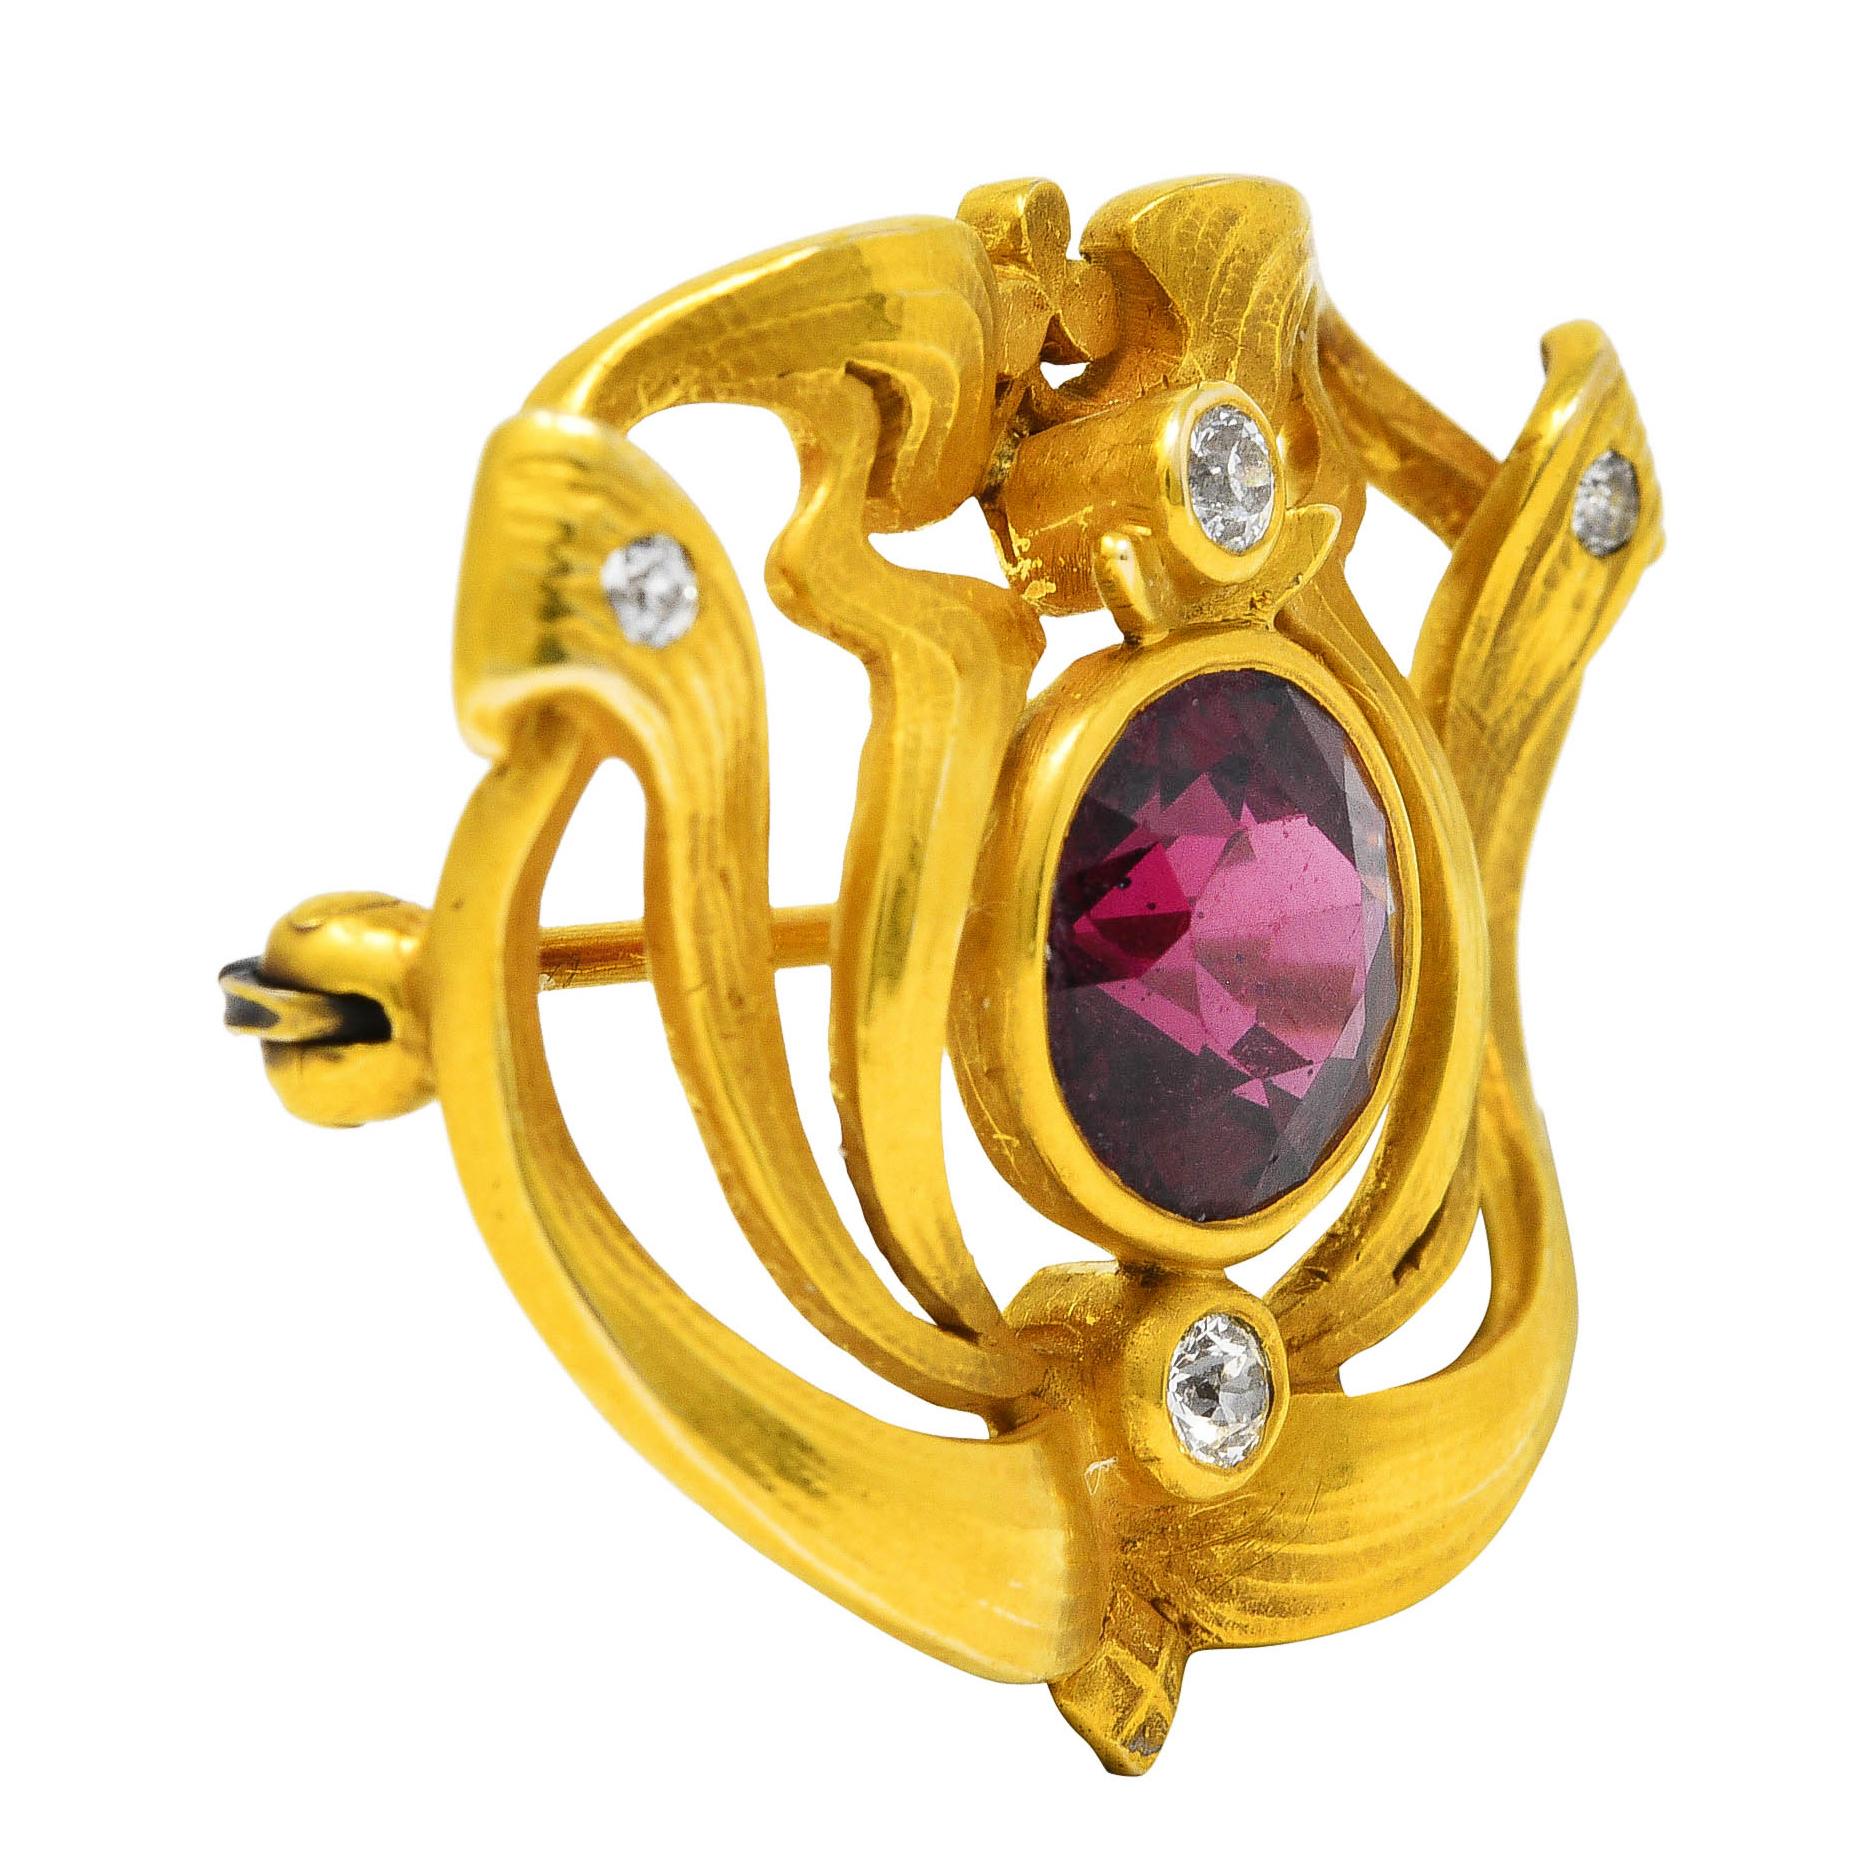 Centering an 8.0 mm round cut garnet - deeply saturated transparent purplish red in color. Bezel set with a billowing gold whiplash motif surround - grooved and finely textured. With old European cut diamonds bezel and flush set throughout. Weighing